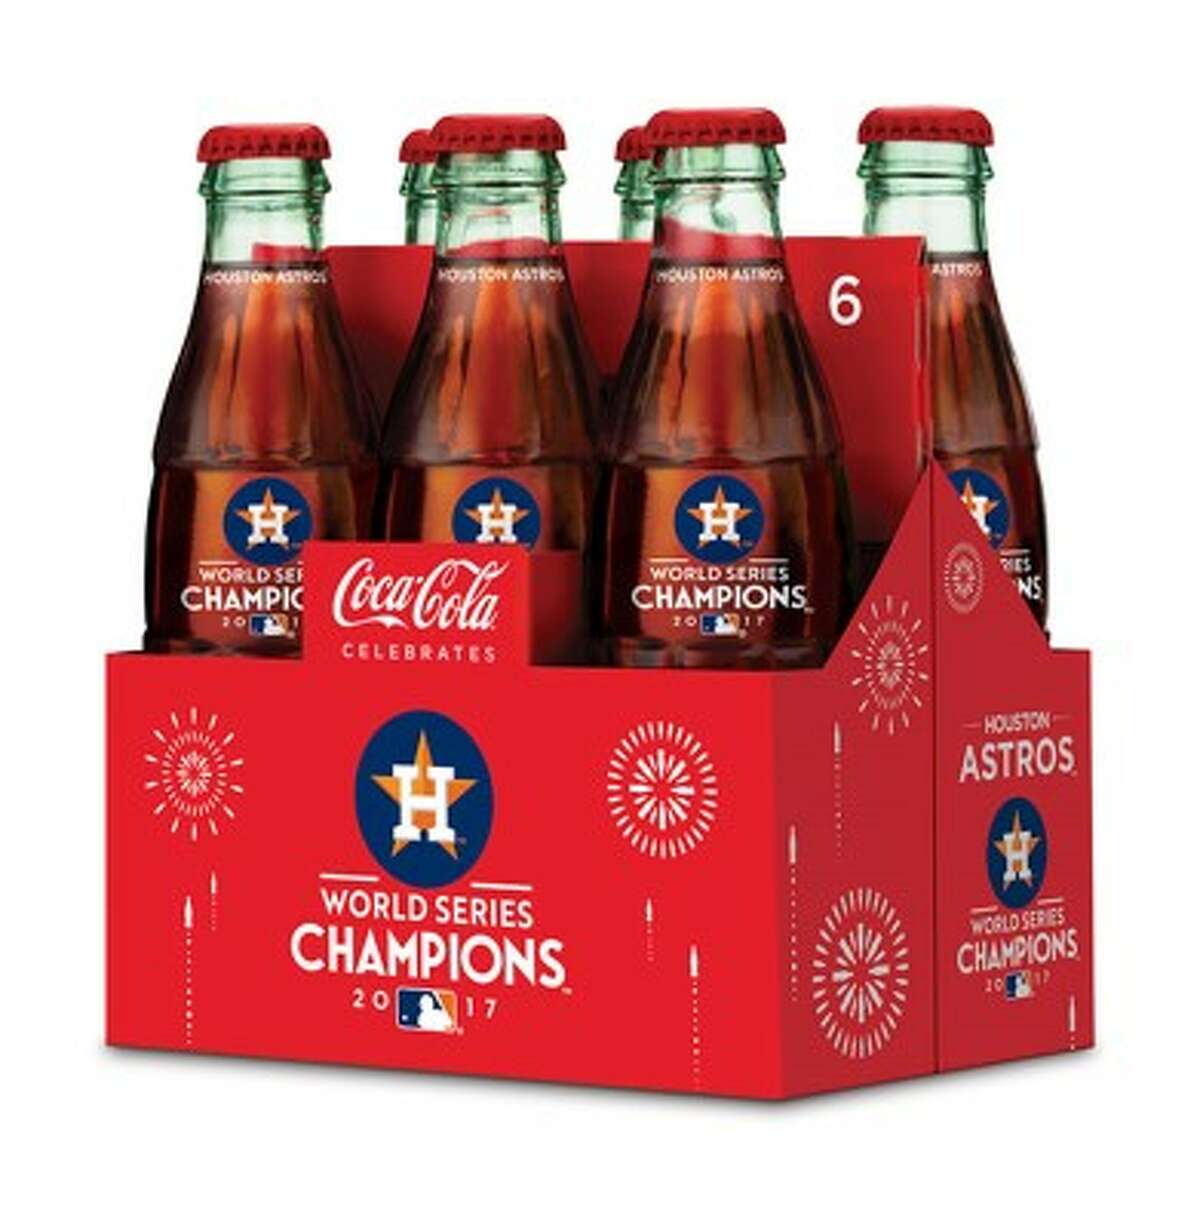 Coca-Cola Southwest Beverages said Monday it has produced an eight-ounce Coca-Cola bottle bearing the Astros logo and 2017 World Series logo. The bottles are available at local Kroger stores beginning Monday. Click through the gallery to see other World Series-inspired gift ideas for Astros fans.